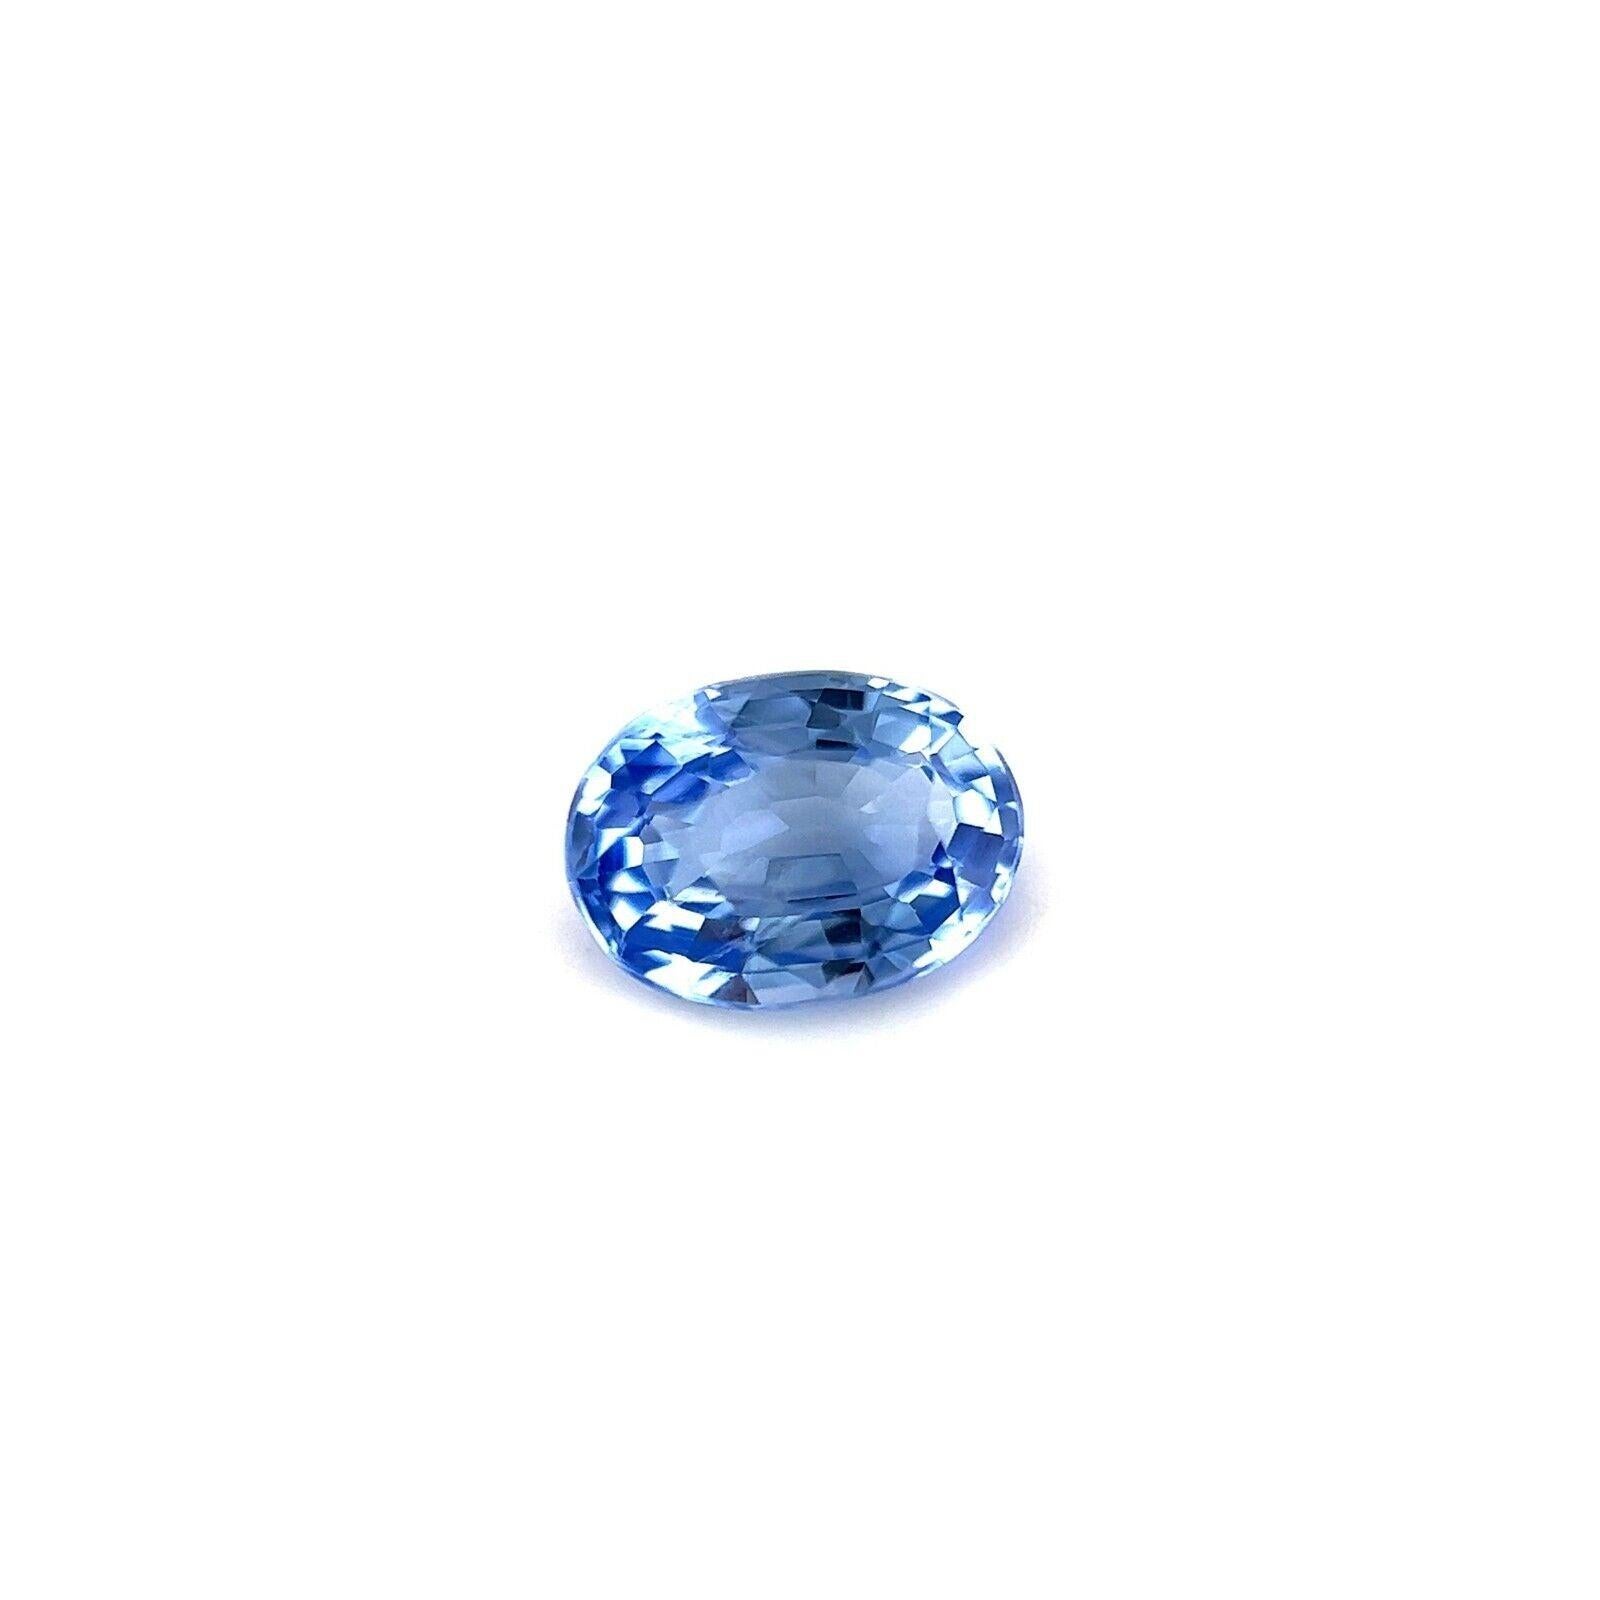 Fine Blue Ceylon Sapphire 0.85ct Oval Cut Rare Loose Gemstone 6.5x4.7mm VVS

Fine Light Blue Ceylon Sapphire Gemstone.
0.85 Carat with a beautiful light blue colour and excellent clarity, a very clean stone, VVS. Also has an excellent oval cut and